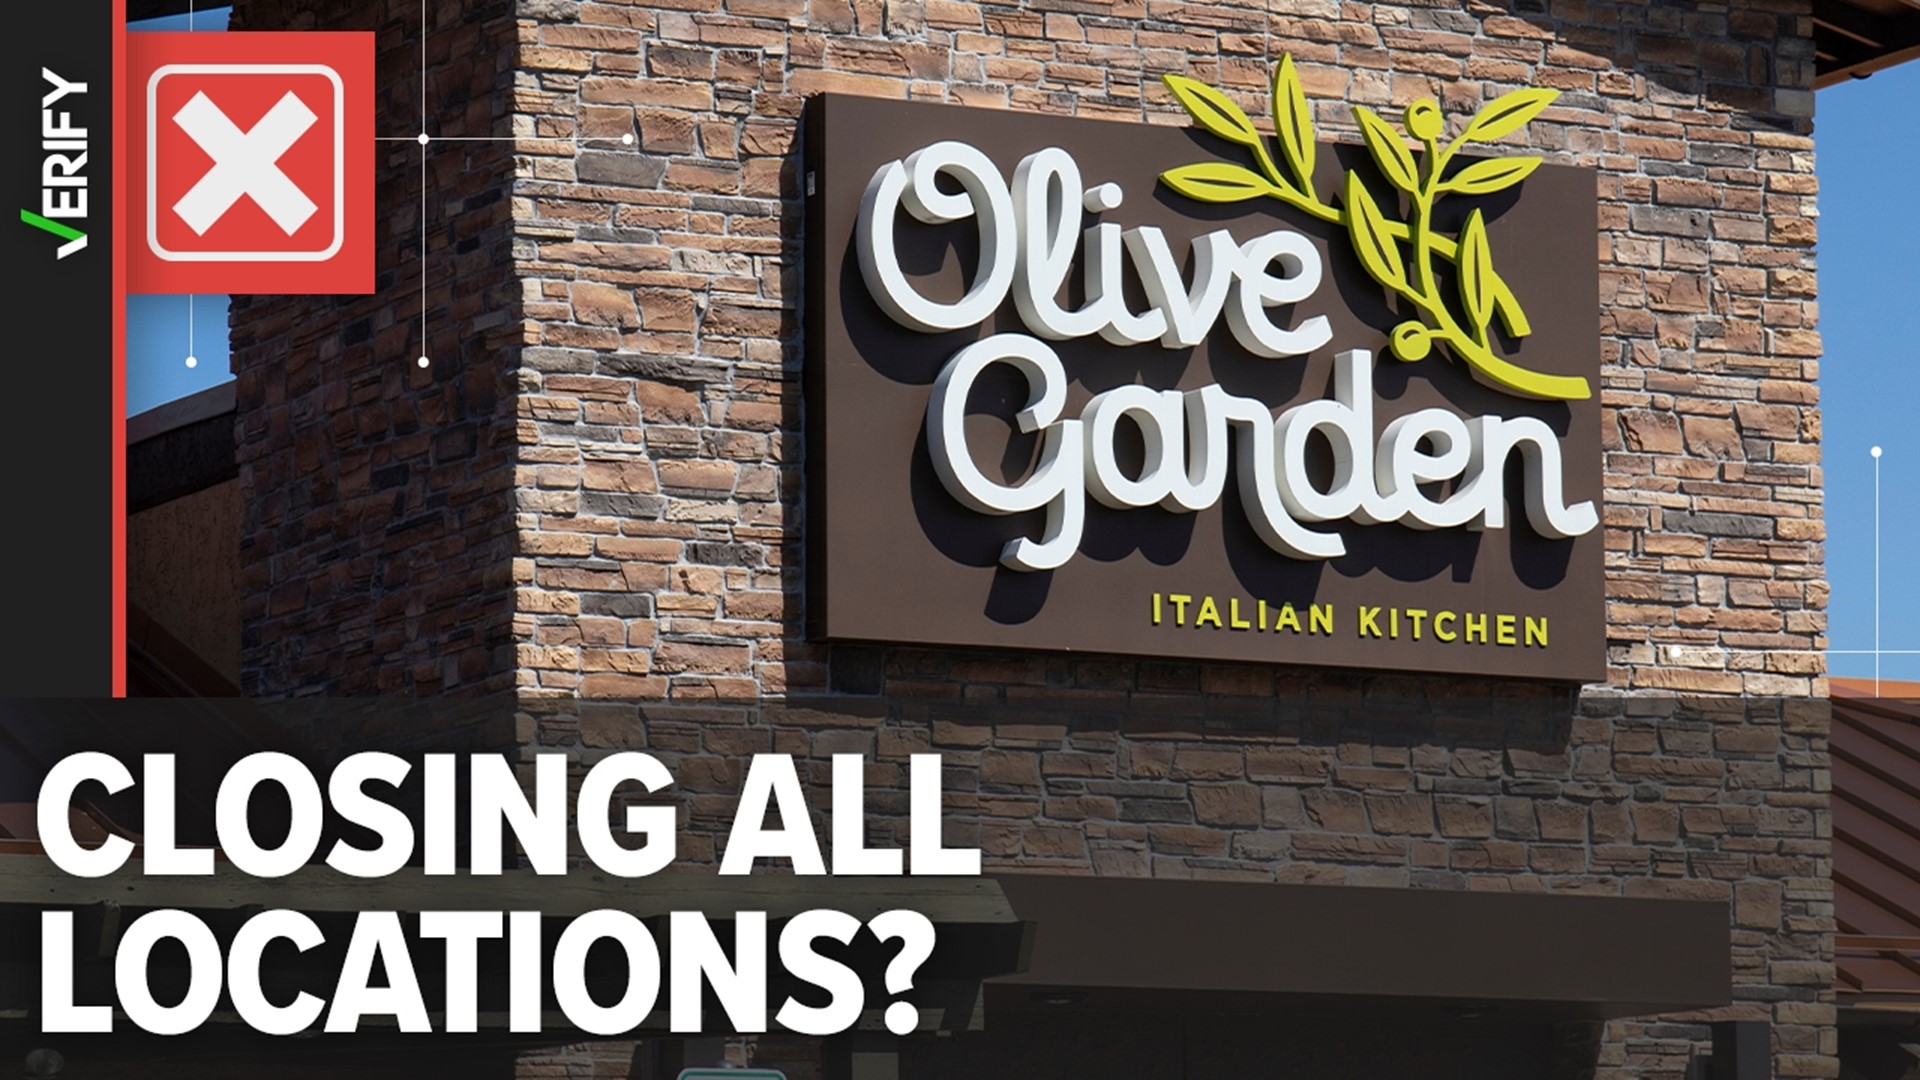 A clickbait Facebook ad ignited the false rumor that Italian restaurant chain Olive Garden is shutting down all of its locations nationwide.